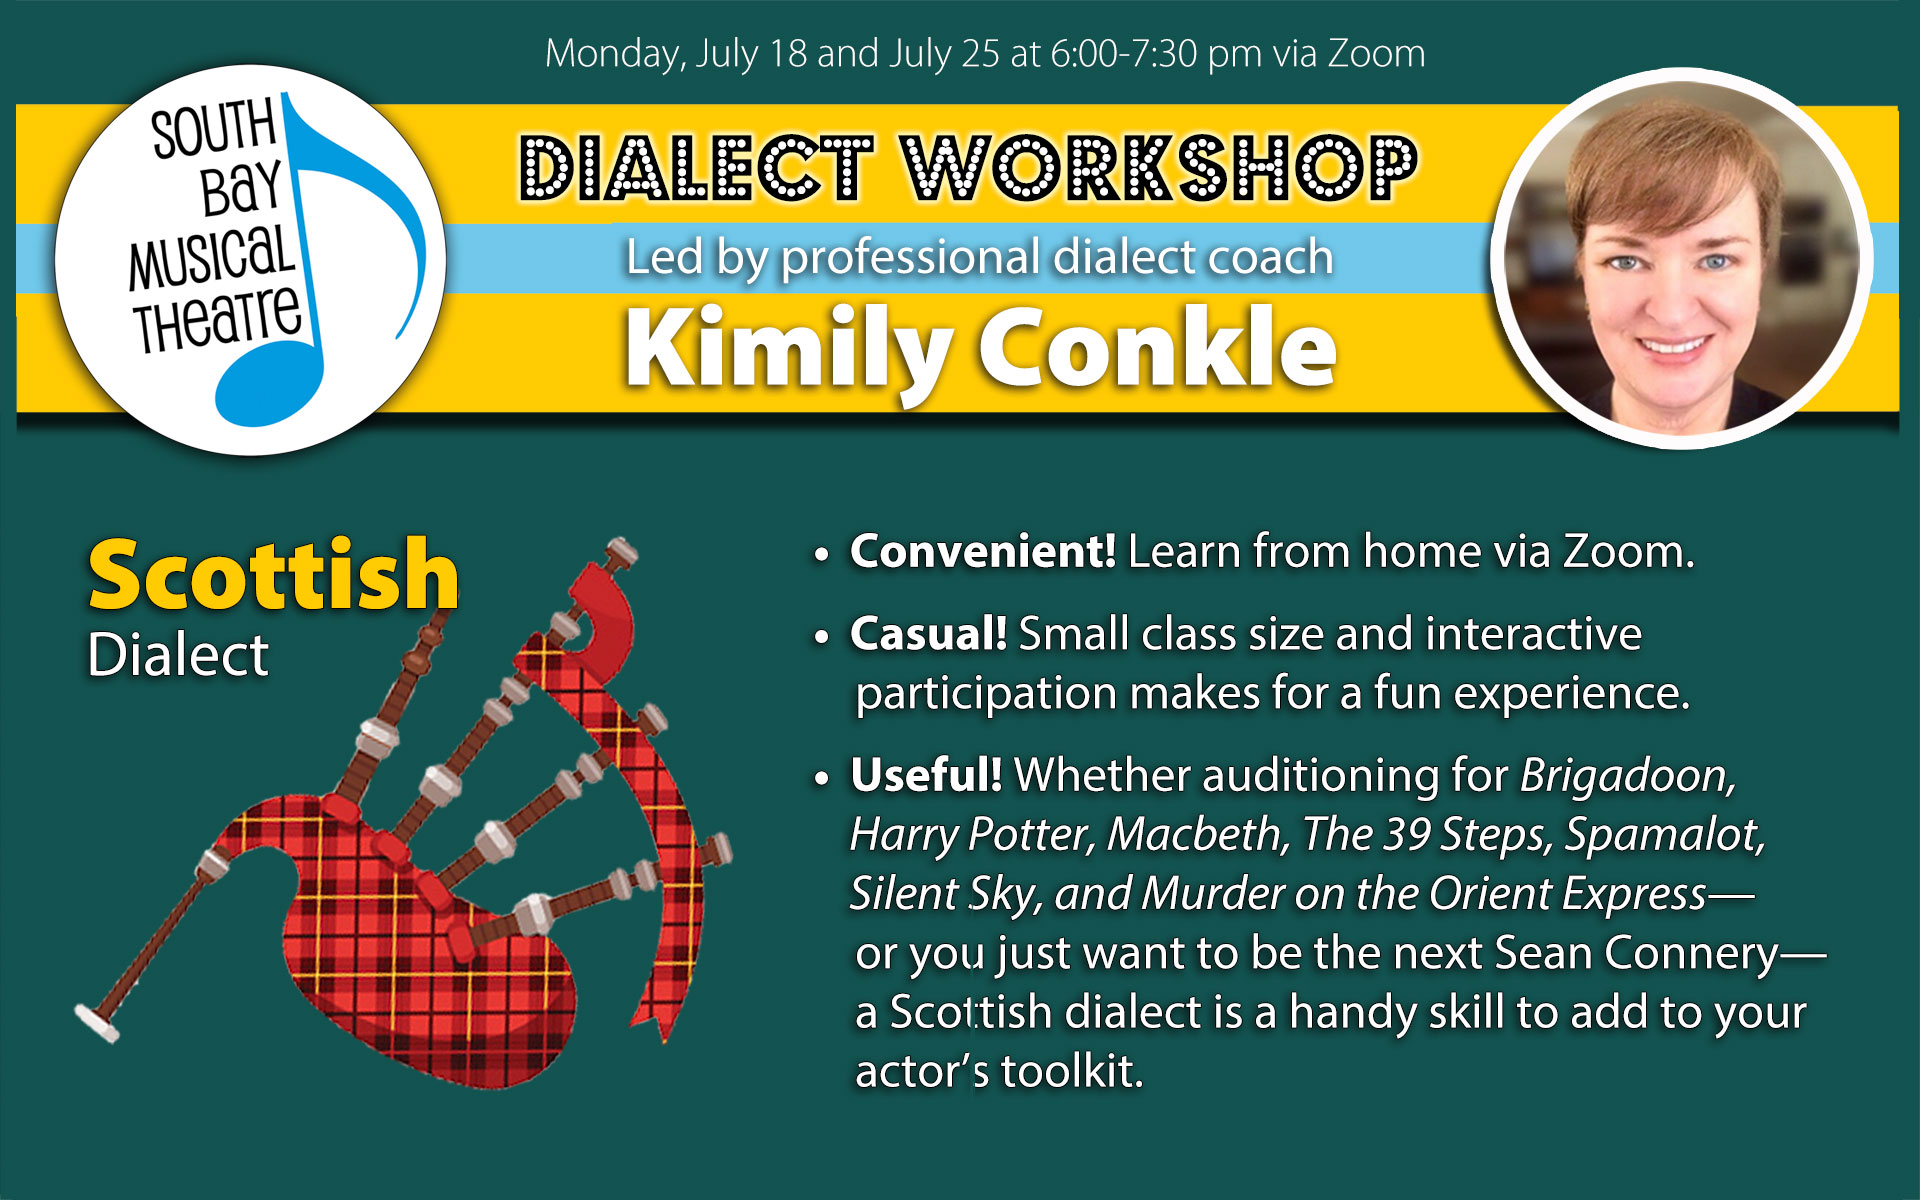 Scottish dialect workshop with Kimily Conkle